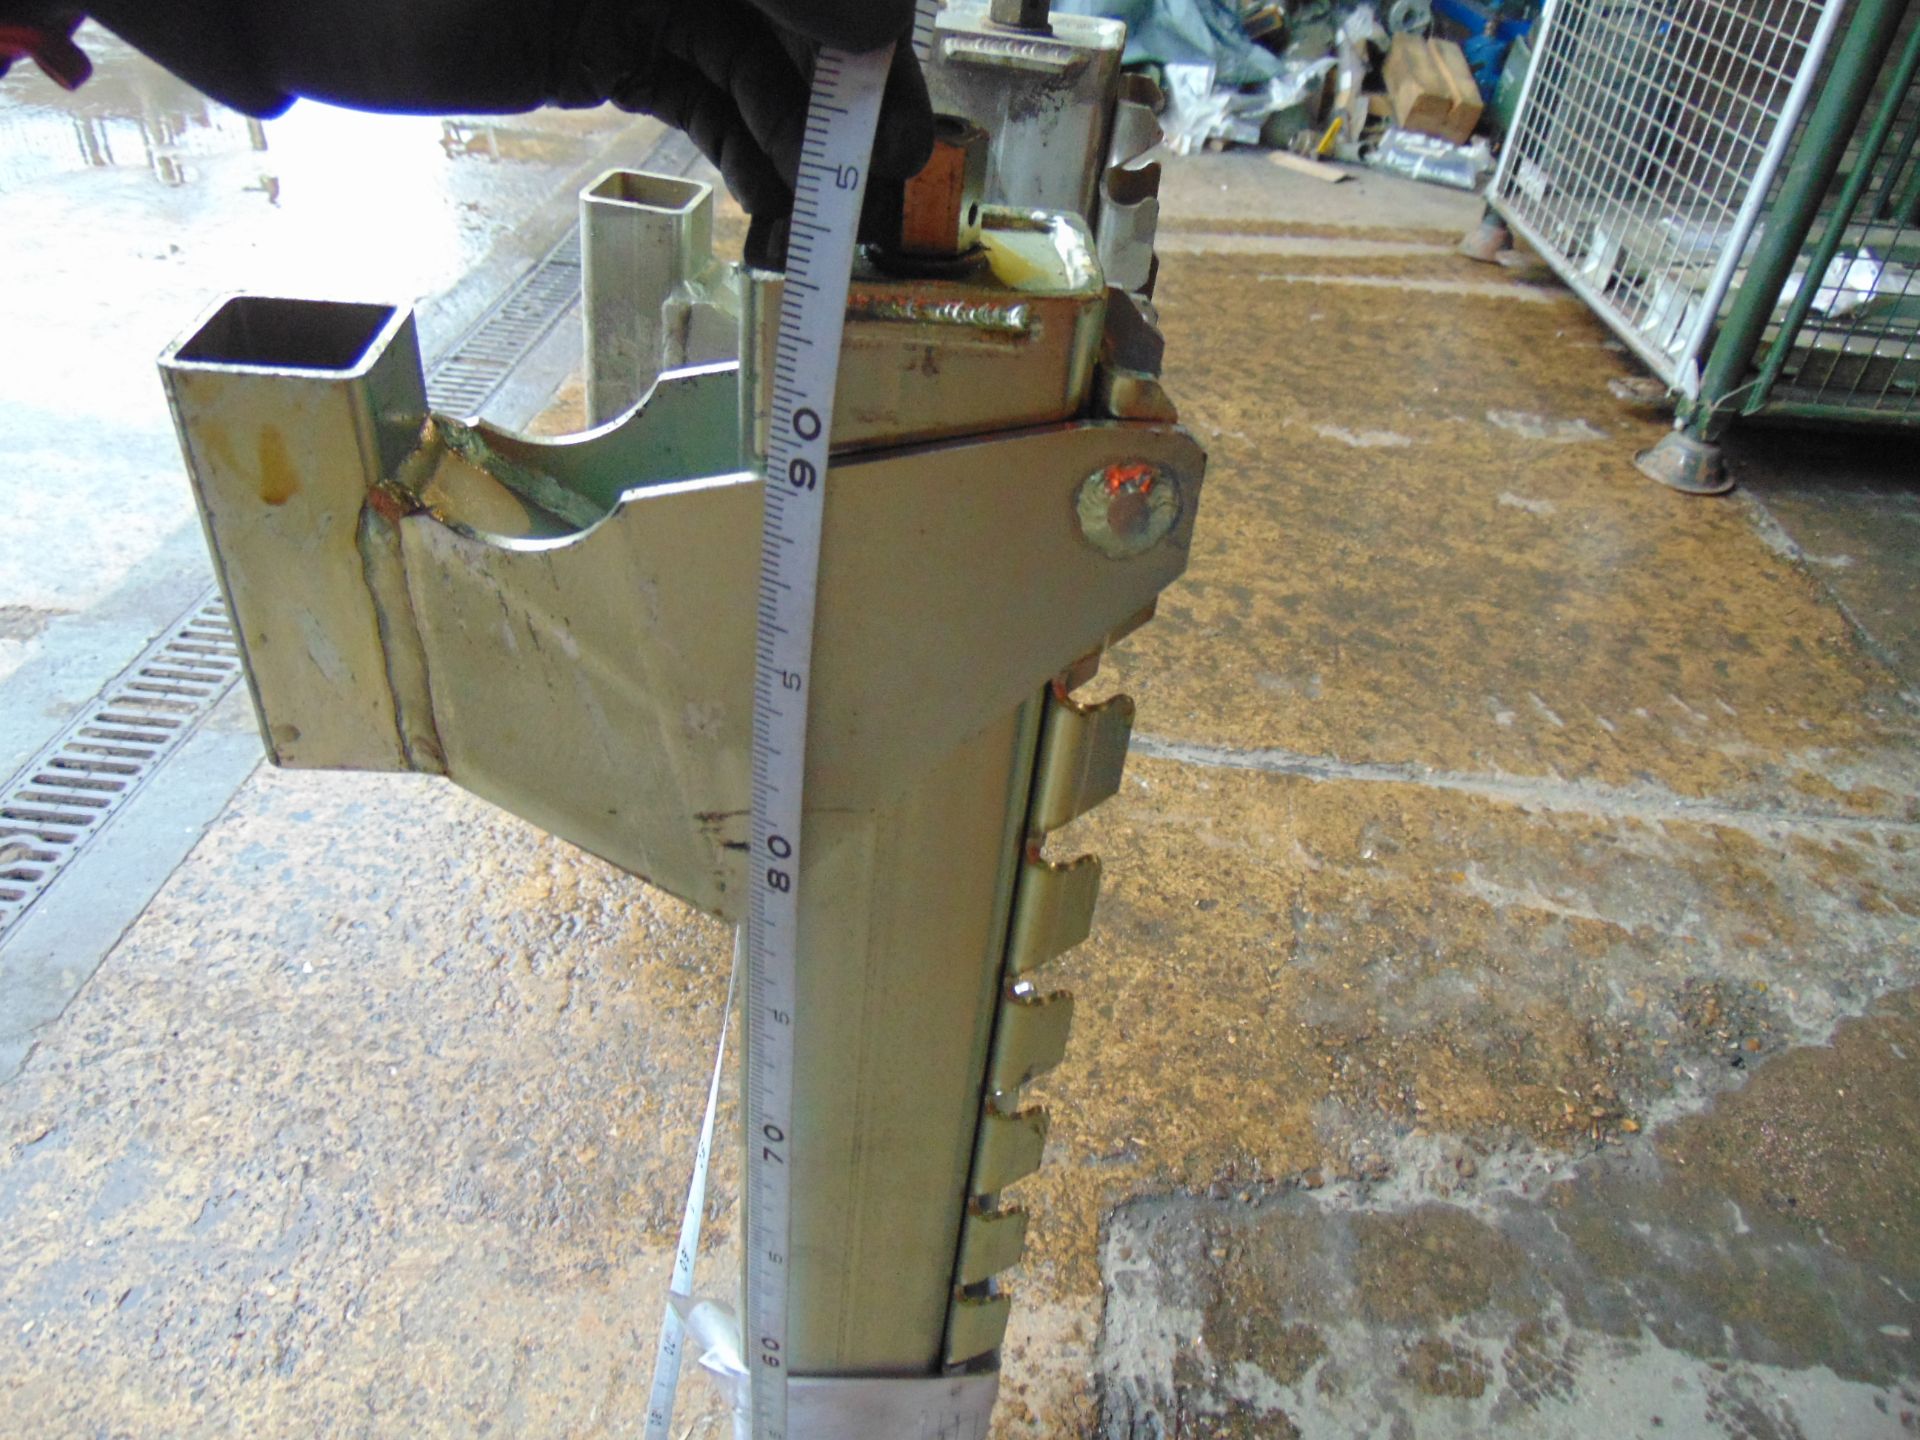 2 x New Unissued 2400kgs High Lift Screw Jacks for 4x4's etc 90cms as shown - Image 6 of 7